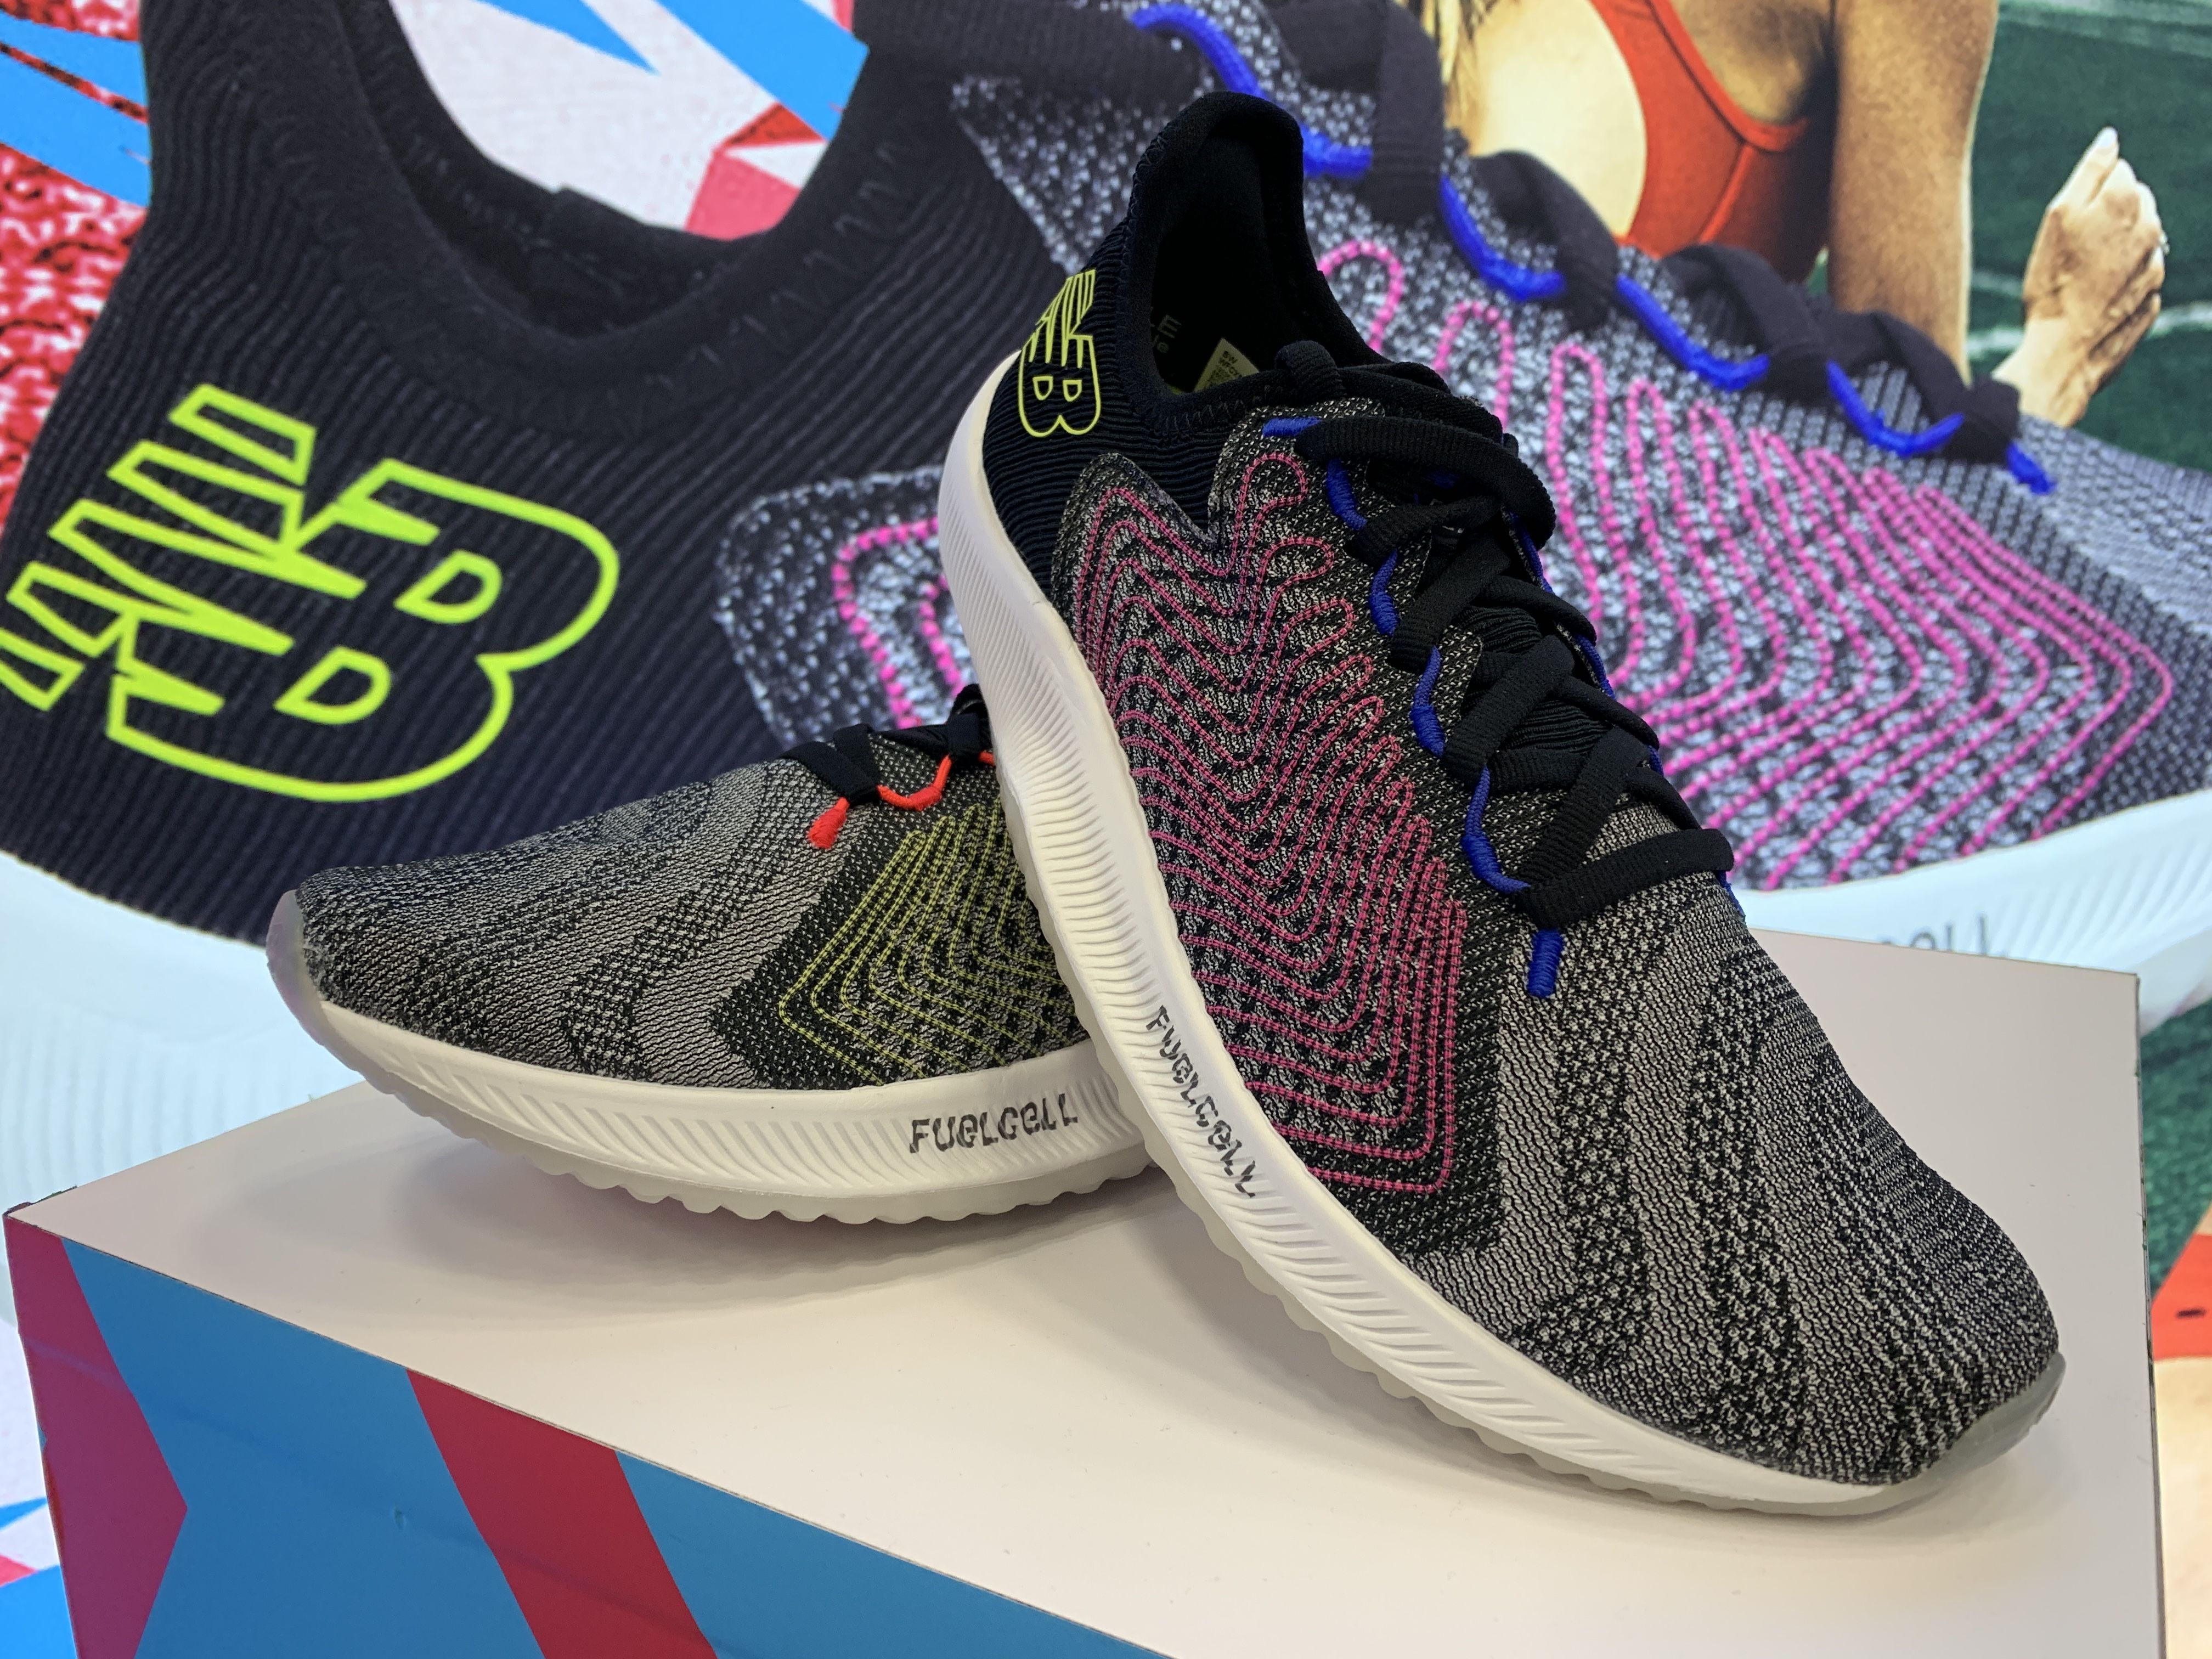 New Running Shoes 2019 | The Running 